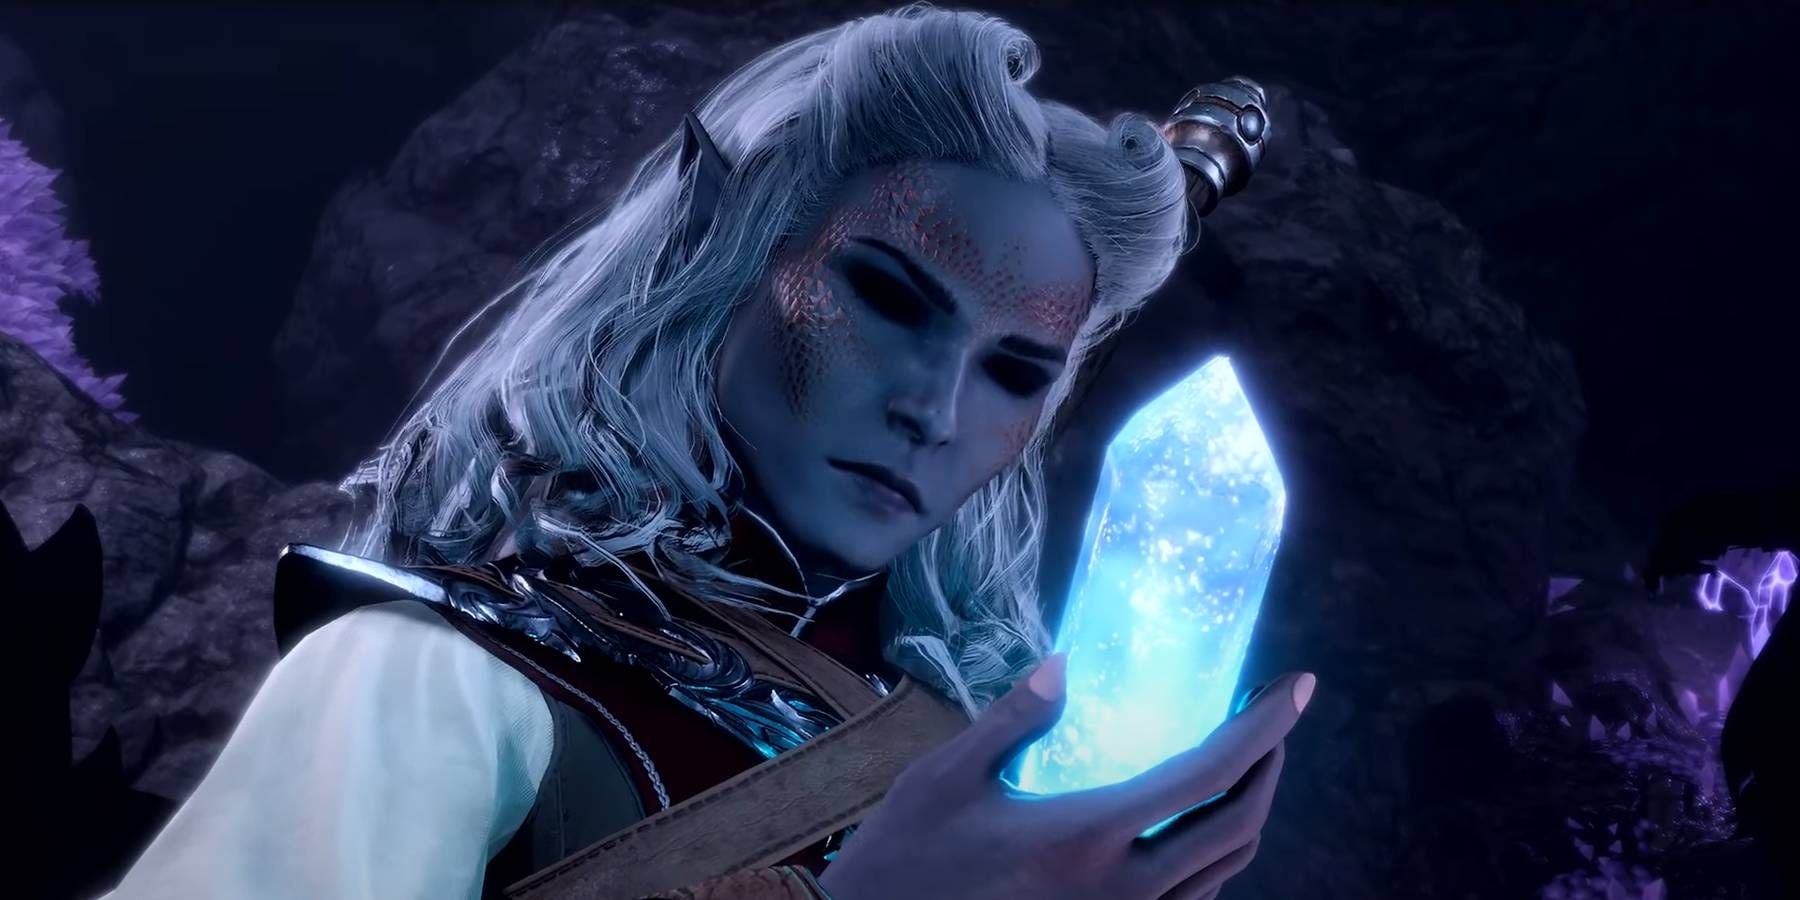 A sorcerer character in Baldur's Gate 3 looks at a shiny blue crystal in their hand.